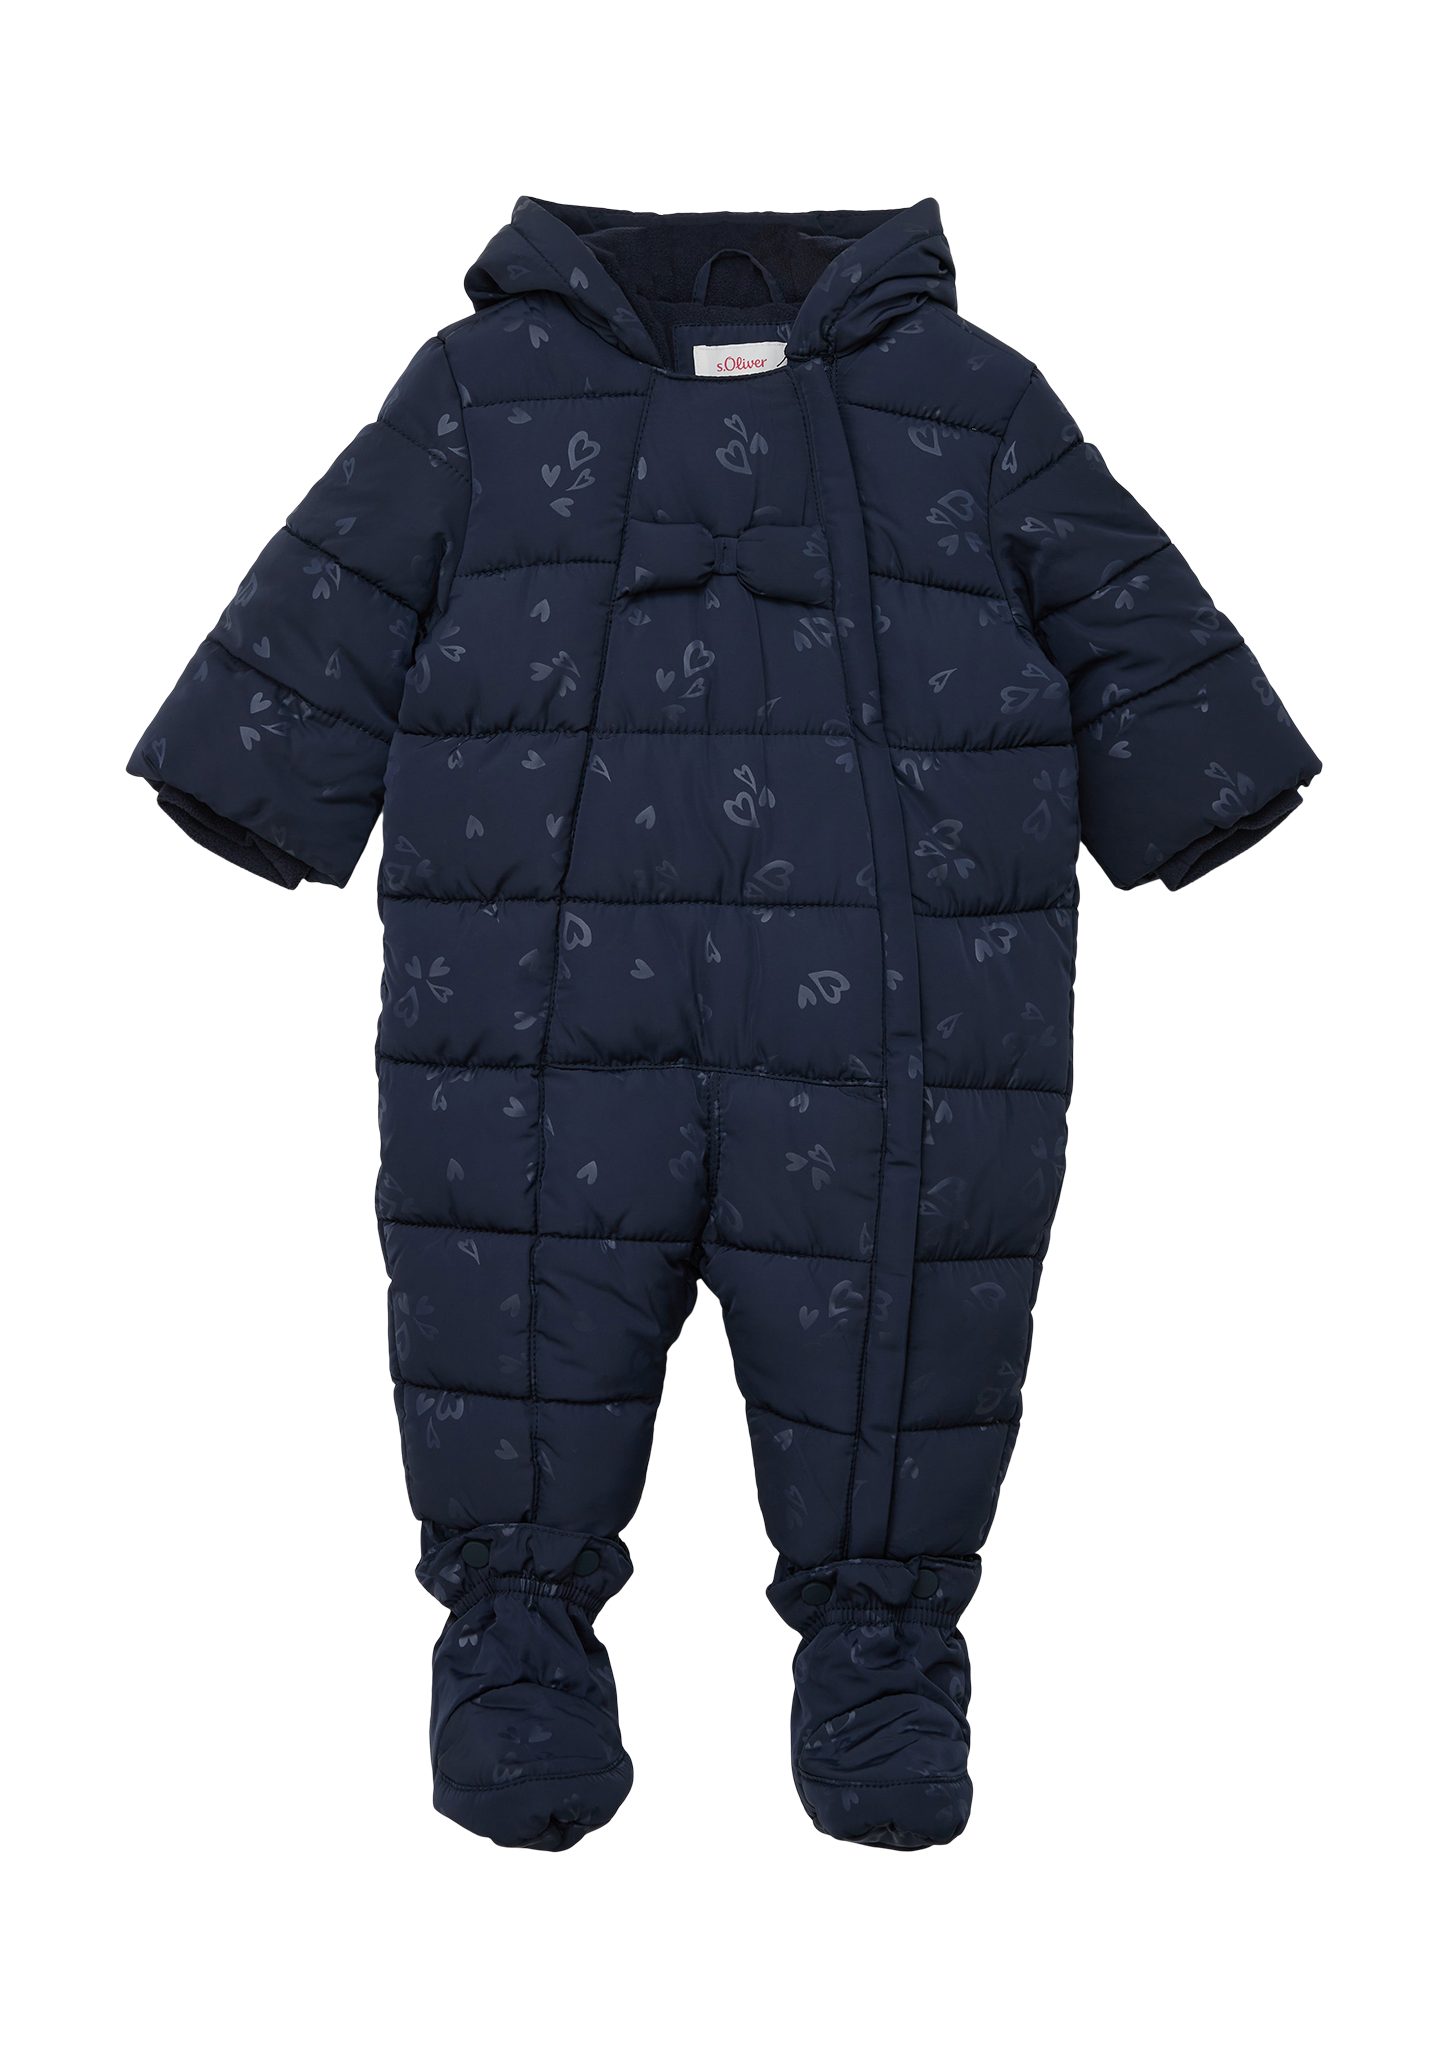 abnehmbaren Schuhen Baby-Overall mit Overall s.Oliver Schleife